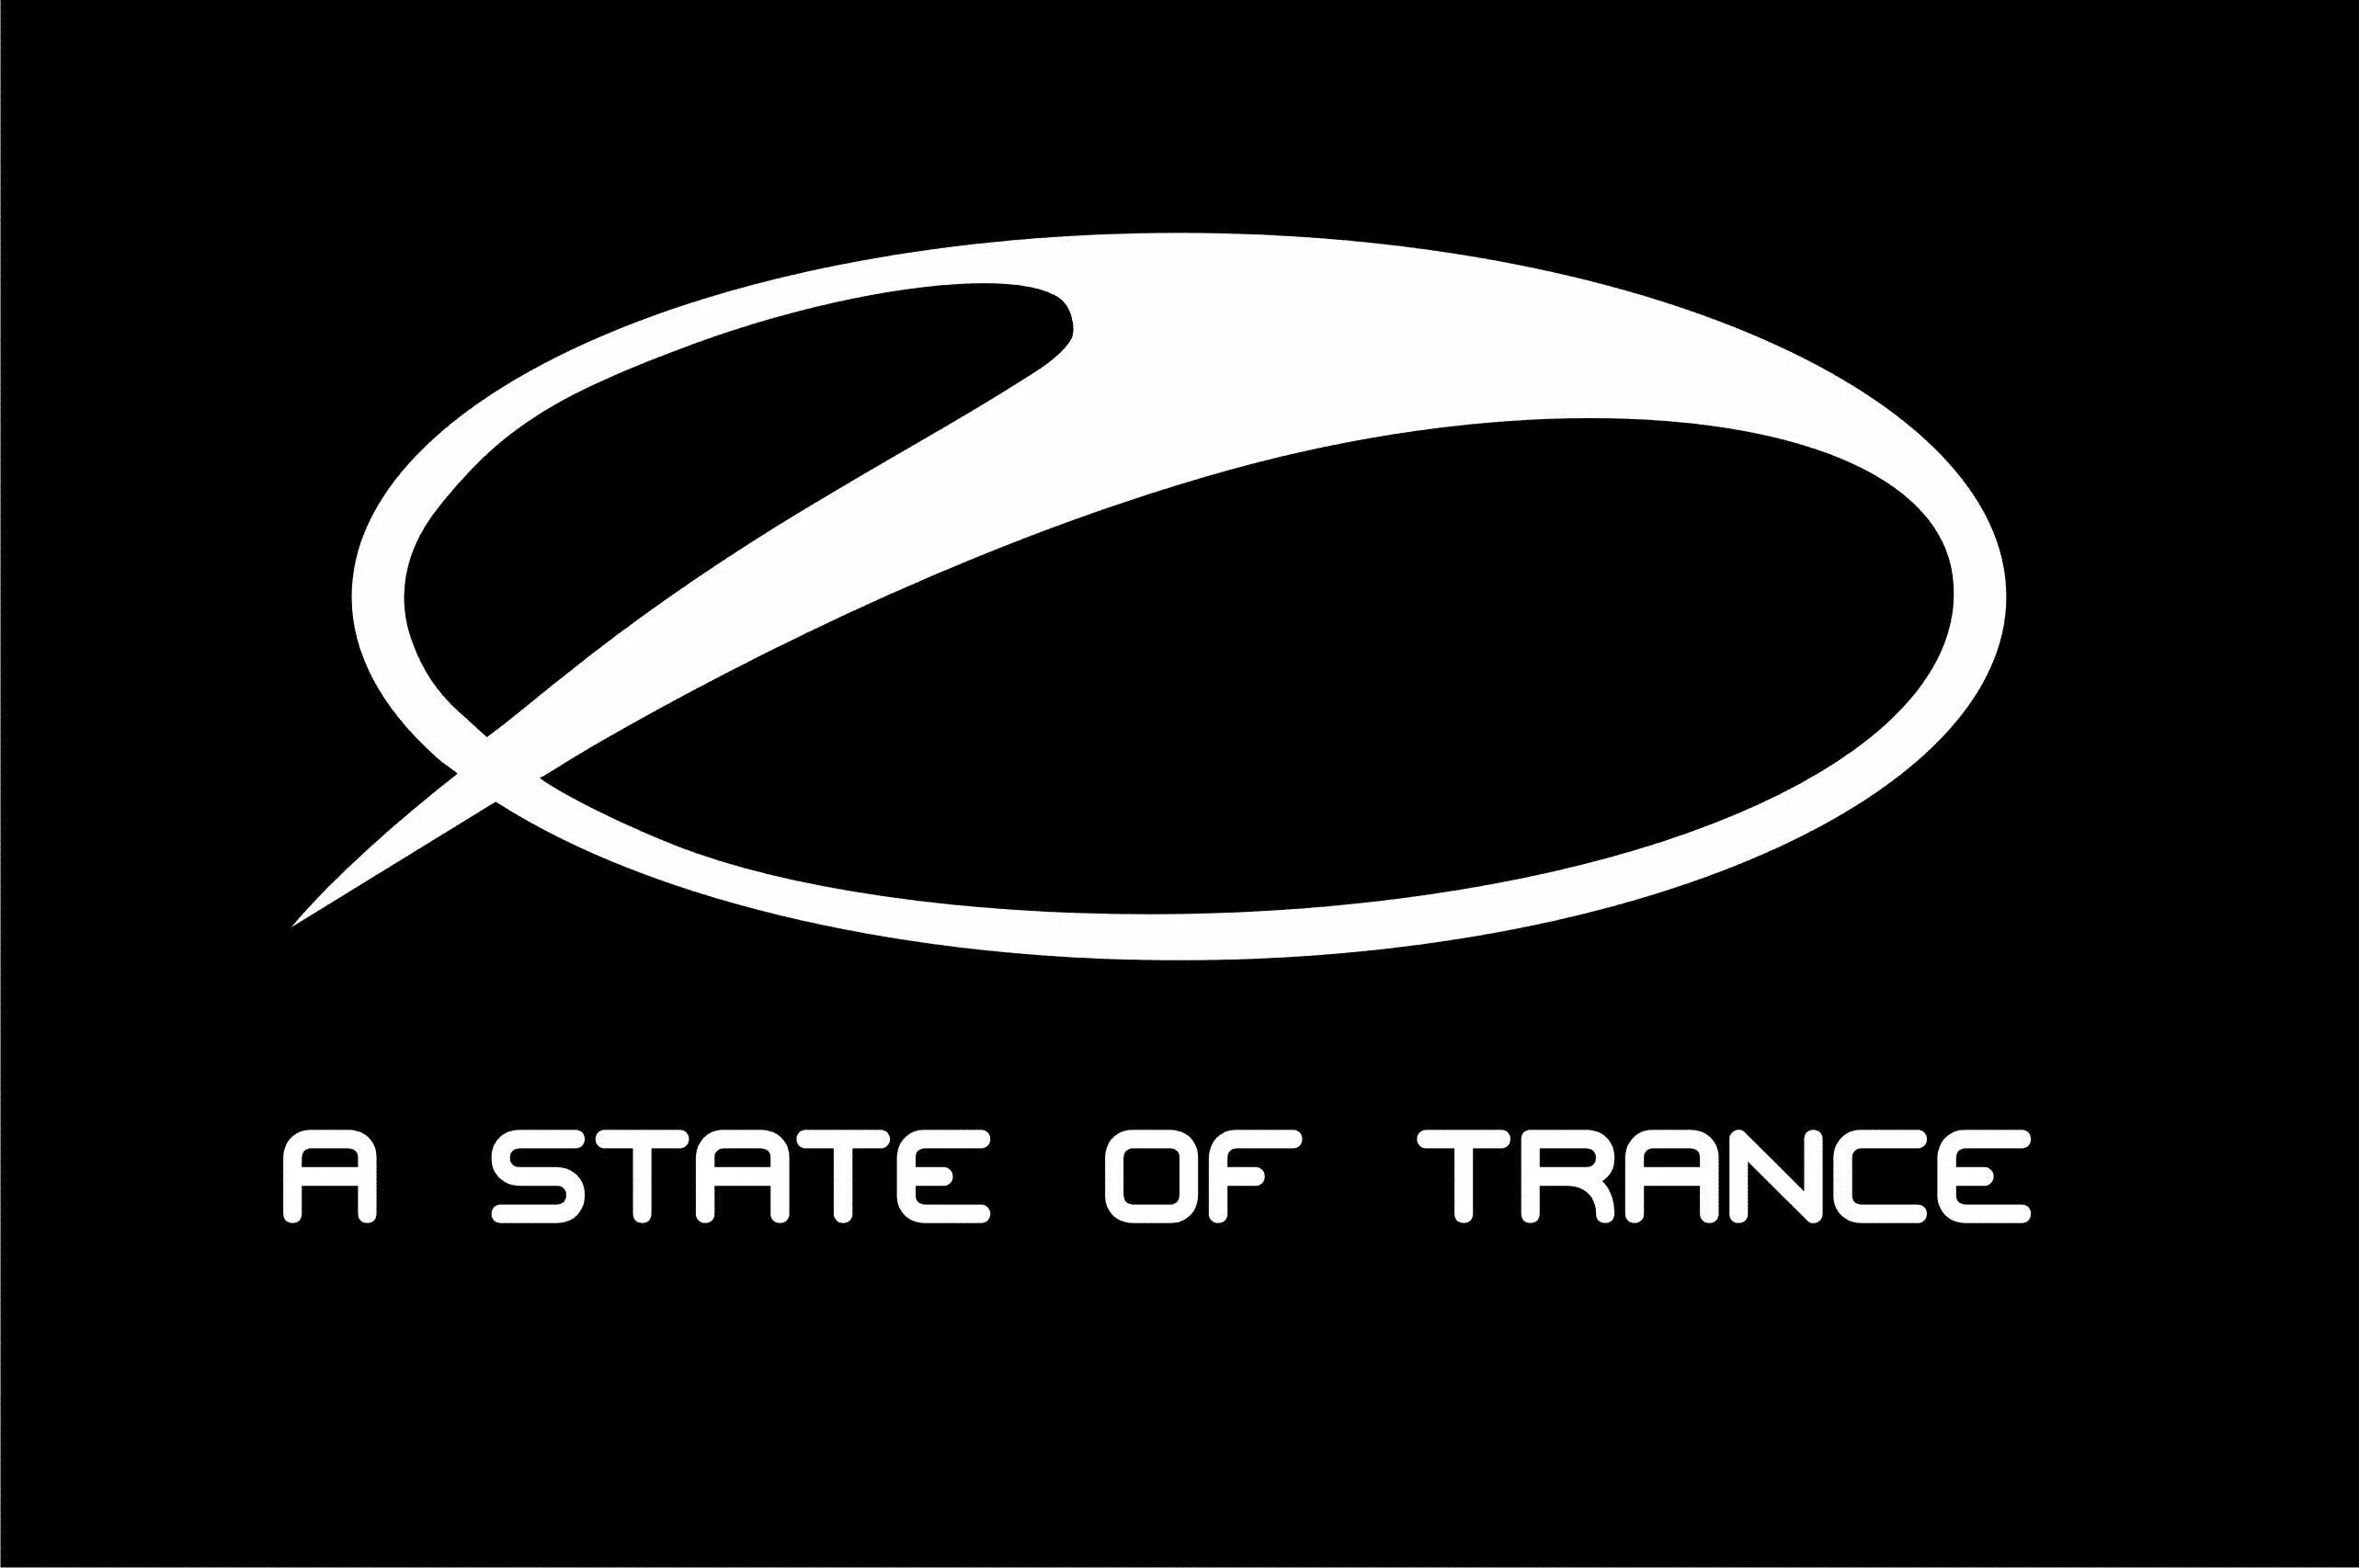 A State of Trance. A State of Trance логотип. ASOT картинки. ASOT обои. Is a state of being well